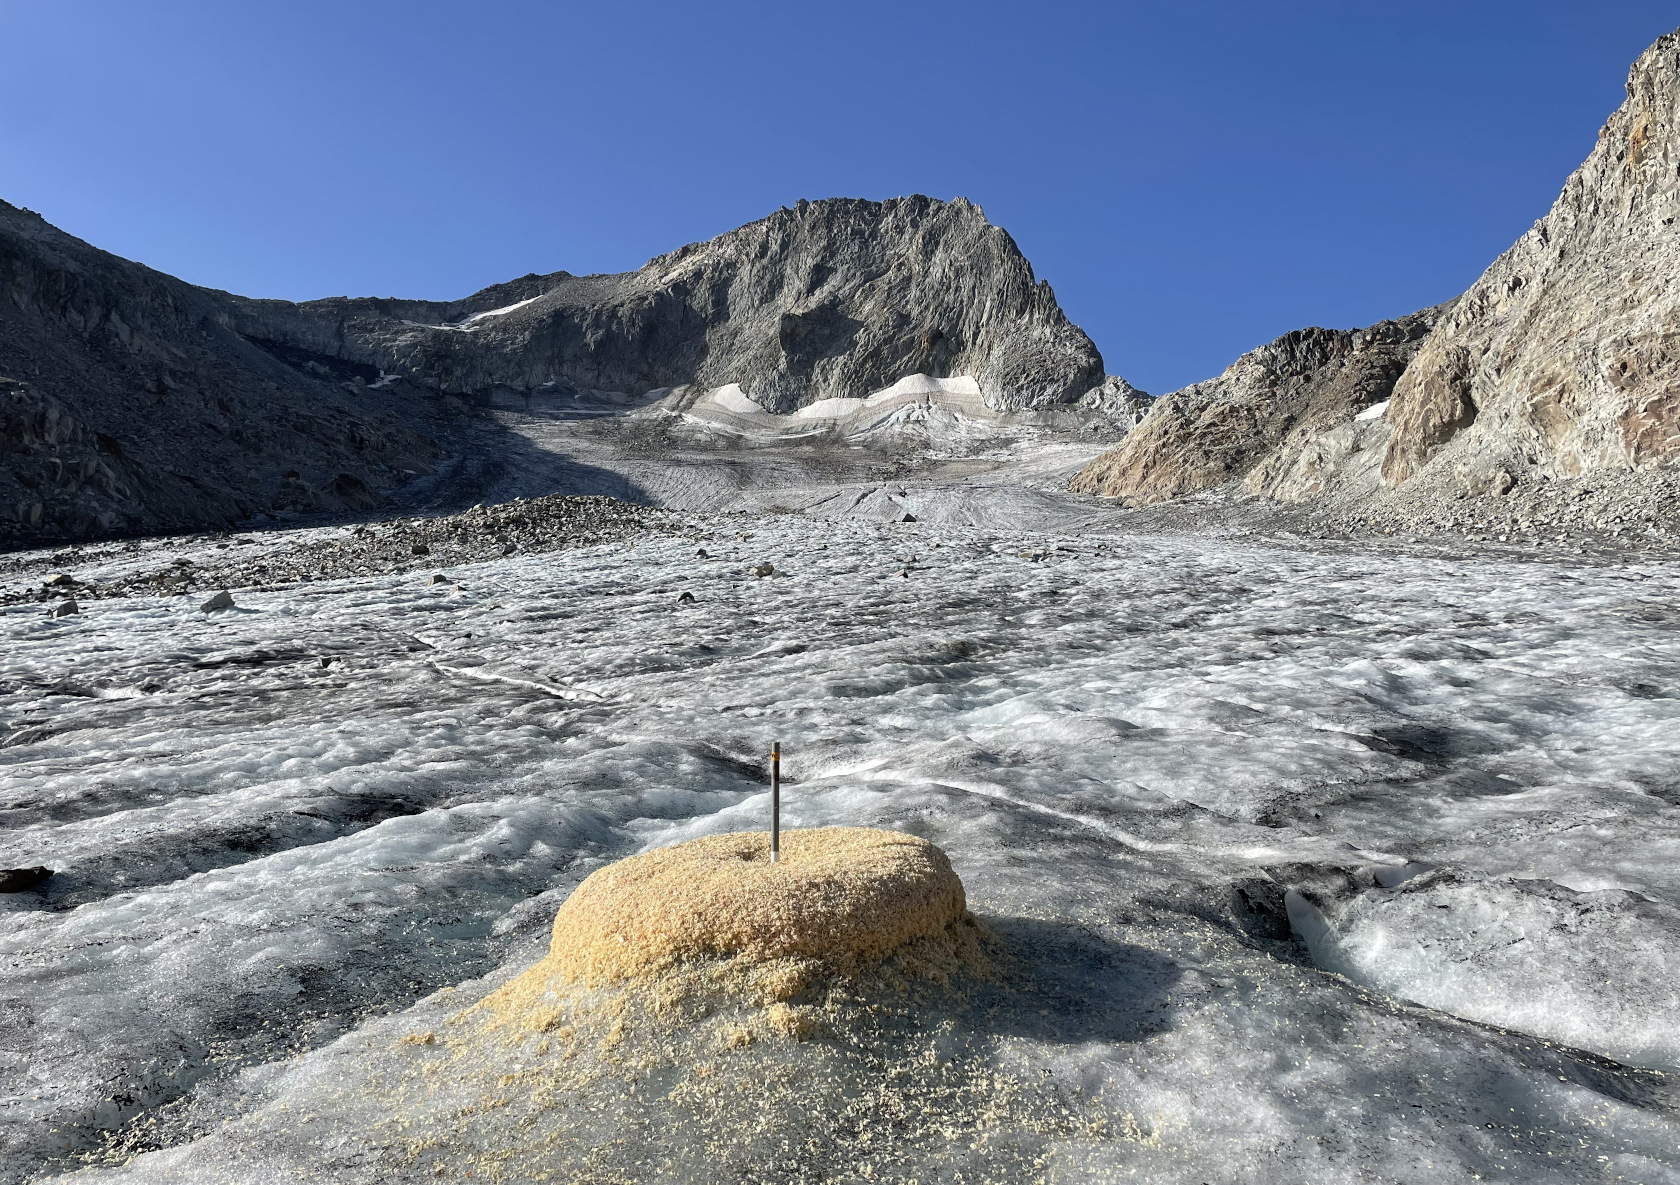 Glacier cake - or how to prevent glaciers from melting